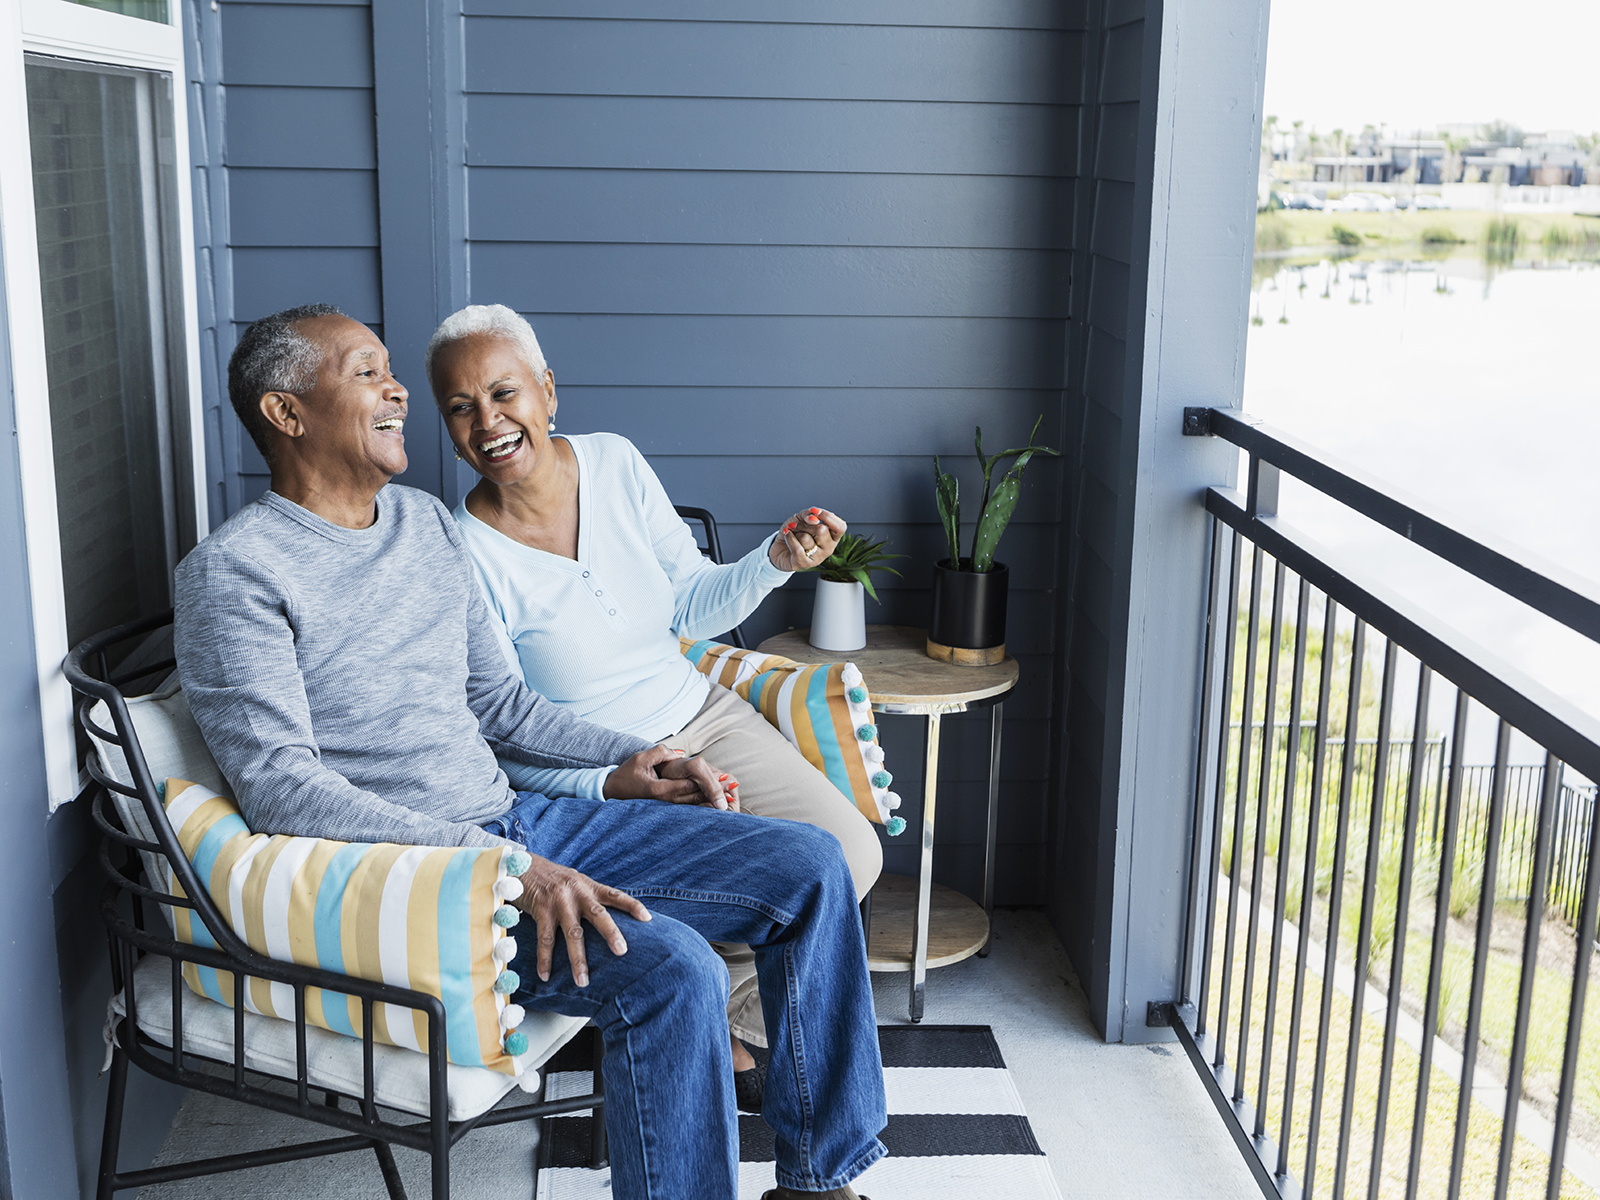 Senior couple laughing together while sitting on a balcony.